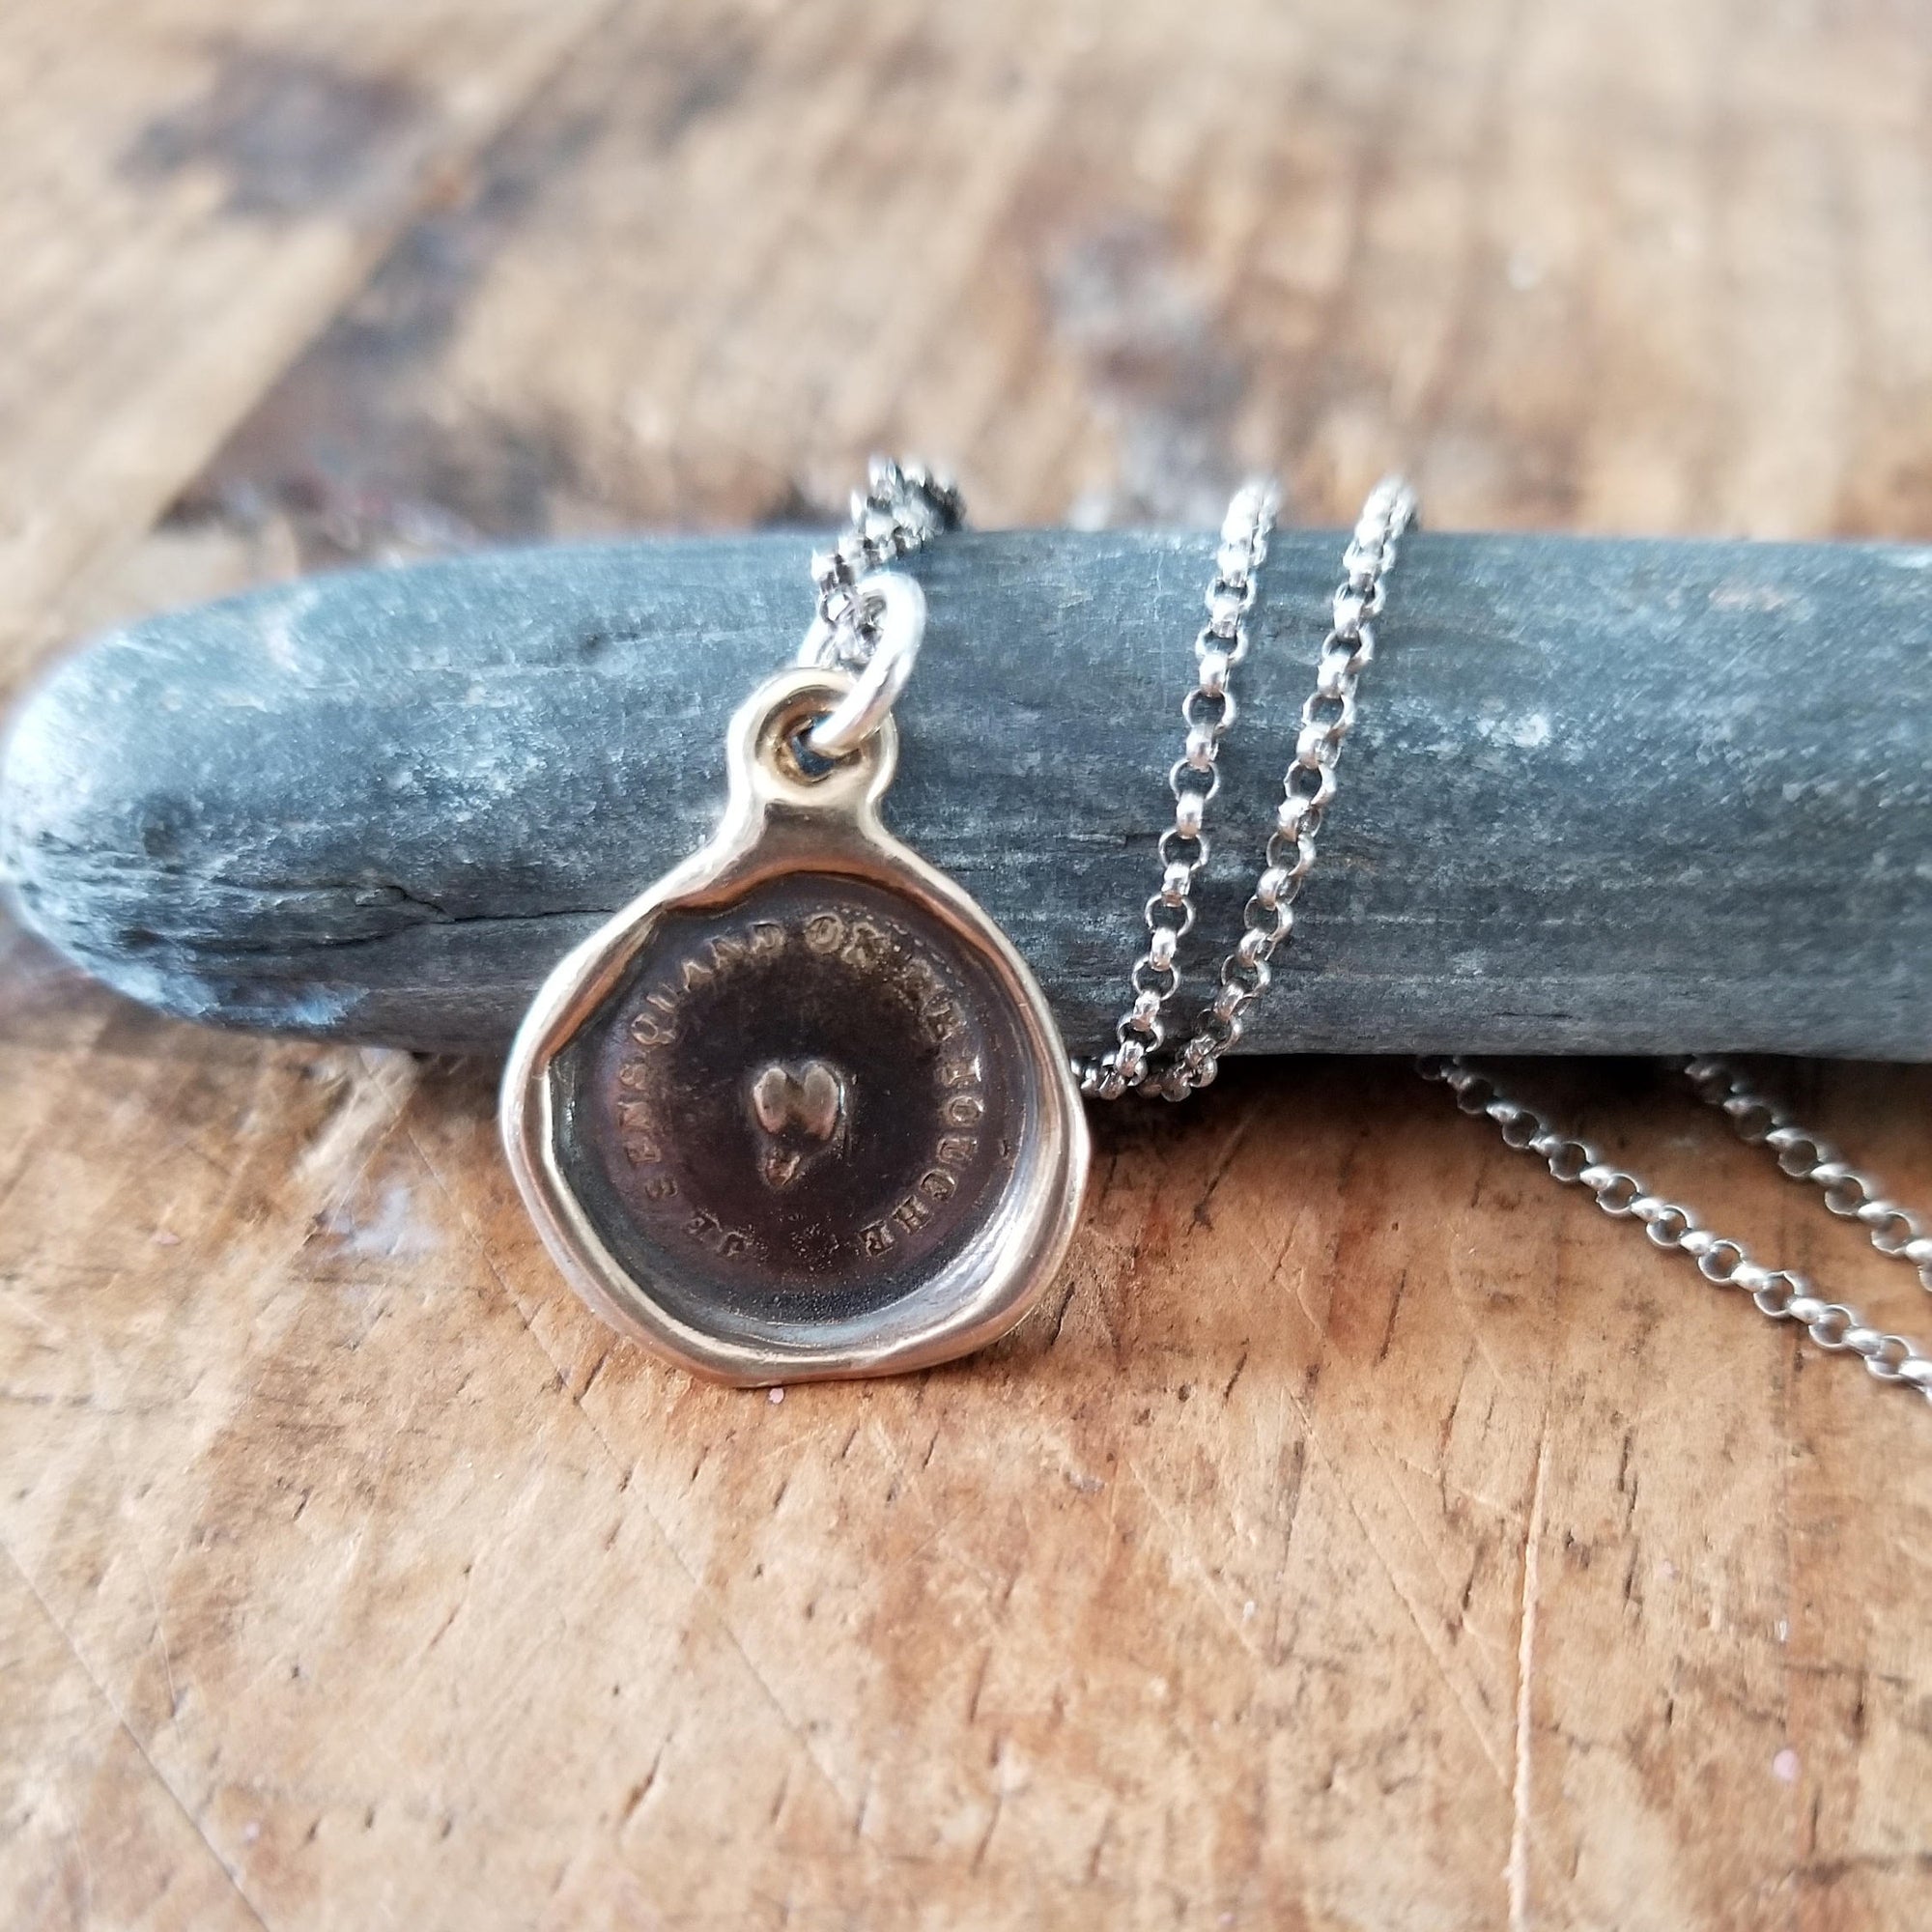 Bronze Sensitive Heart Necklace - I feel every touch